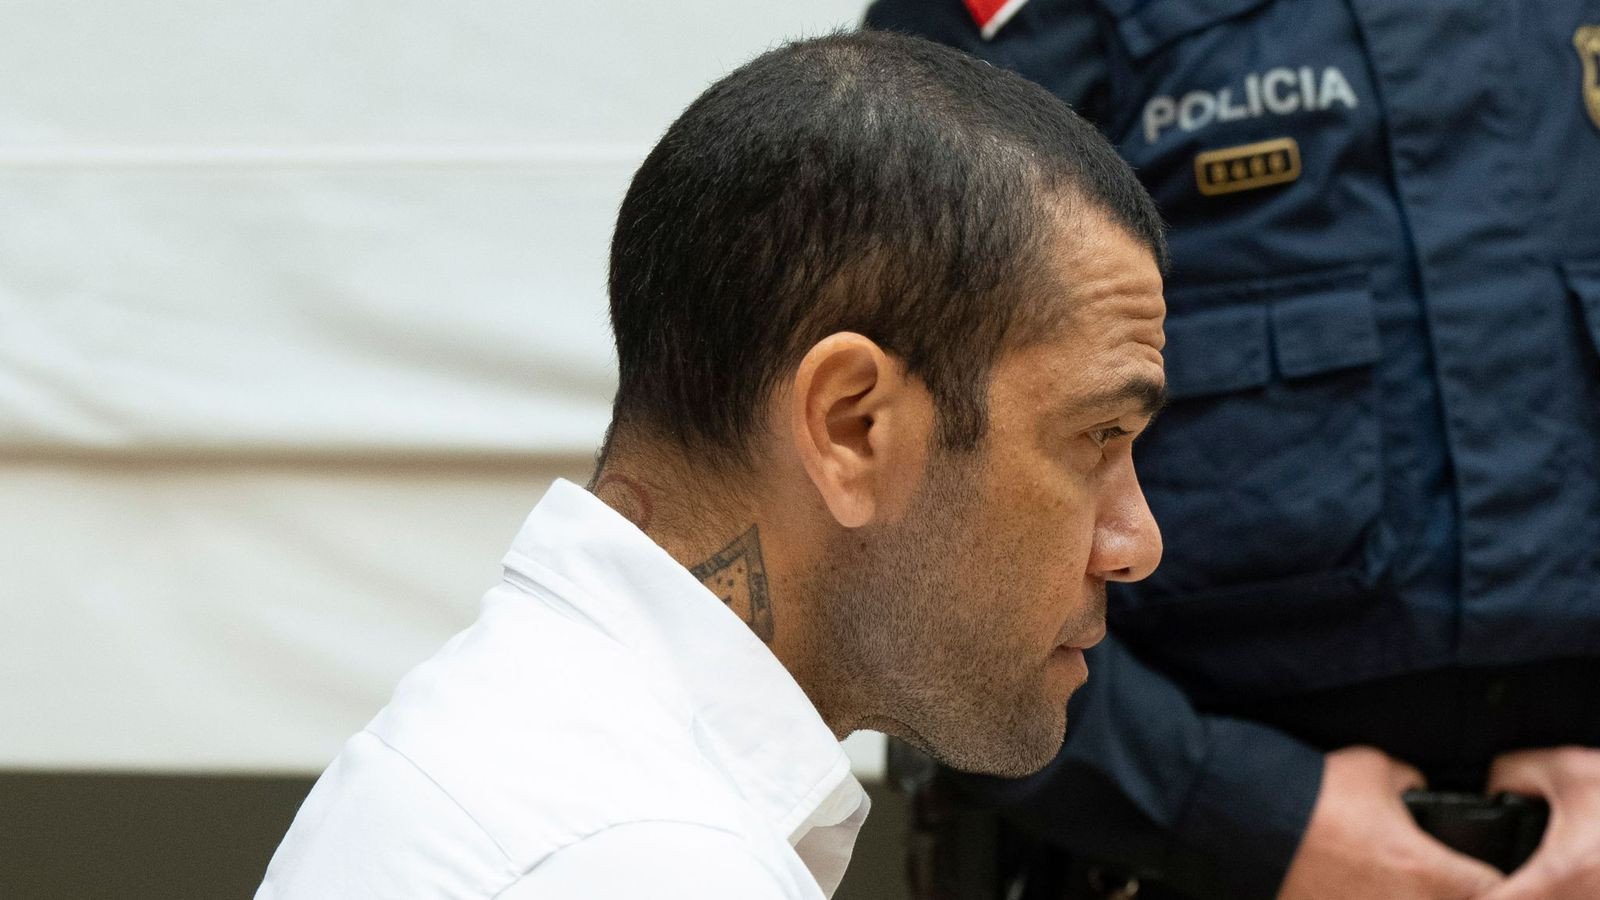 Neymar Jr’s €150,000 donation reduced Dani Alves’ prison sentence after allegedly found guilty of s*xual assault